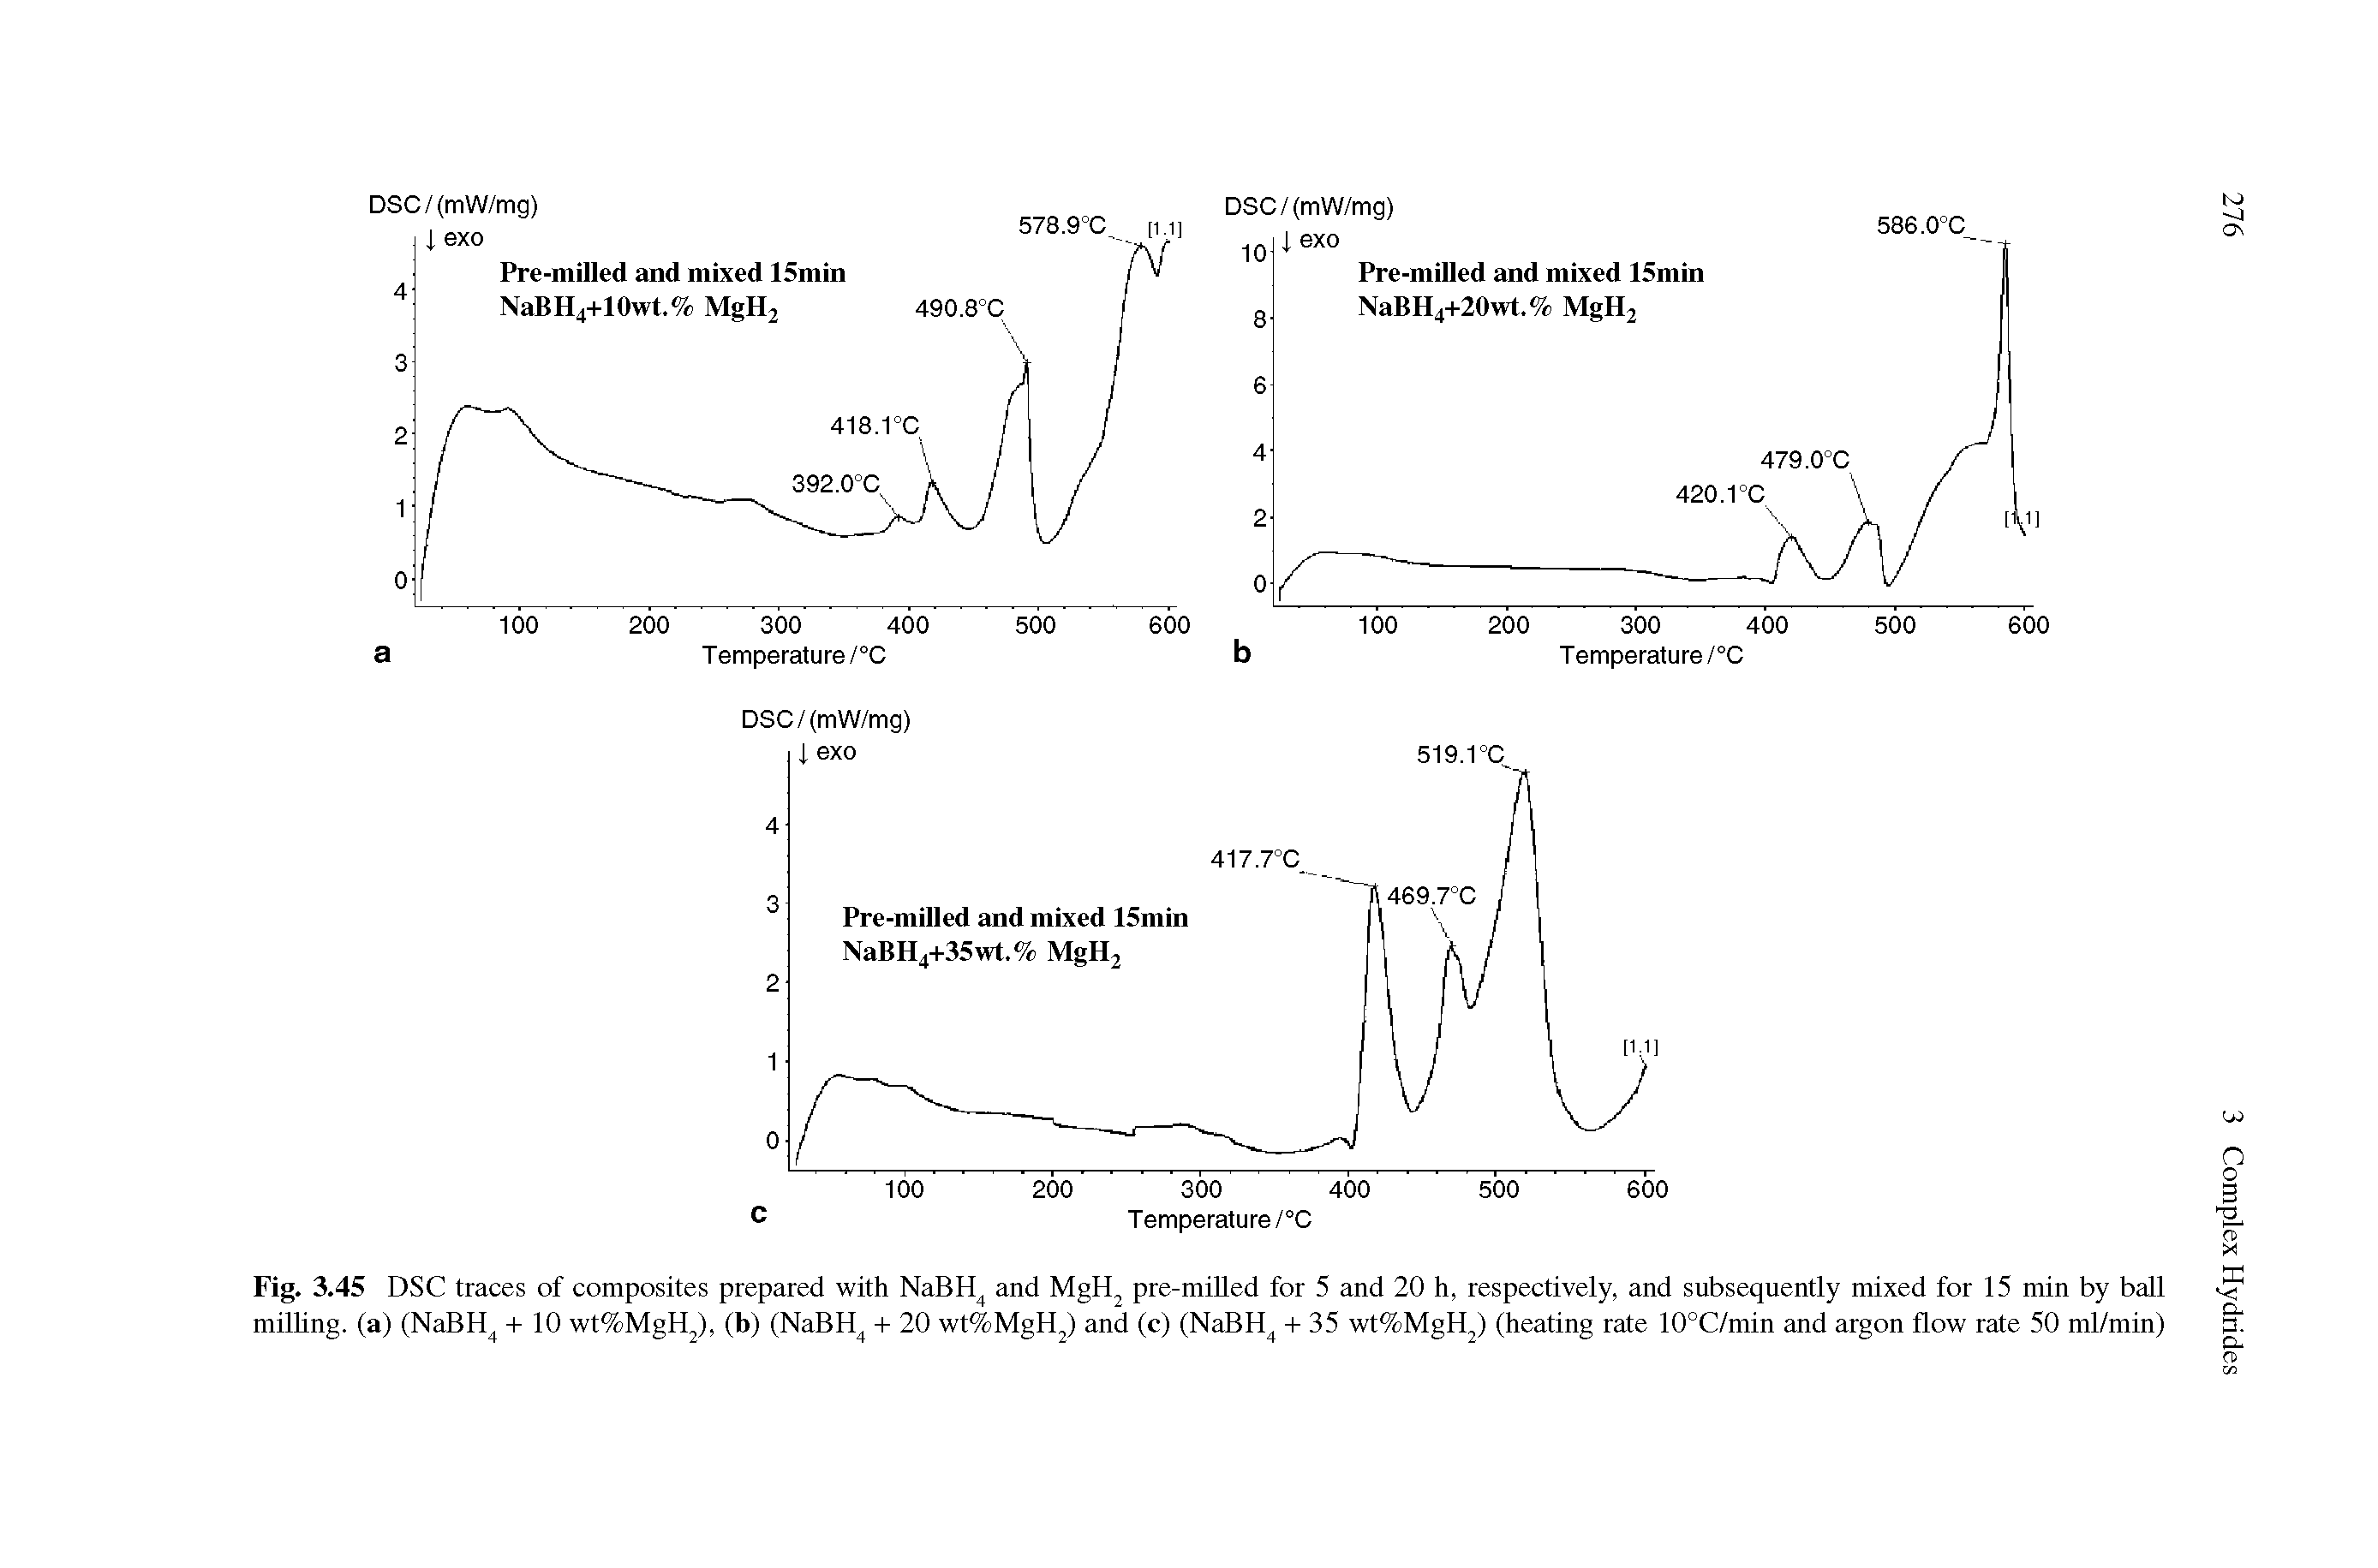 Fig. 3.45 DSC traces of composites prepared with NaBH and MgH pre-milled for 5 and 20 h, respectively, and subsequently mixed for 15 min by ball milling, (a) (NaBH + 10 wt%MgH2), (b) (NaBH + 20 wt%MgH2) and (c) (NaBH + 35 wt%MgH2) (heating rate 10°C/min and argon flow rate 50 ml/min)...